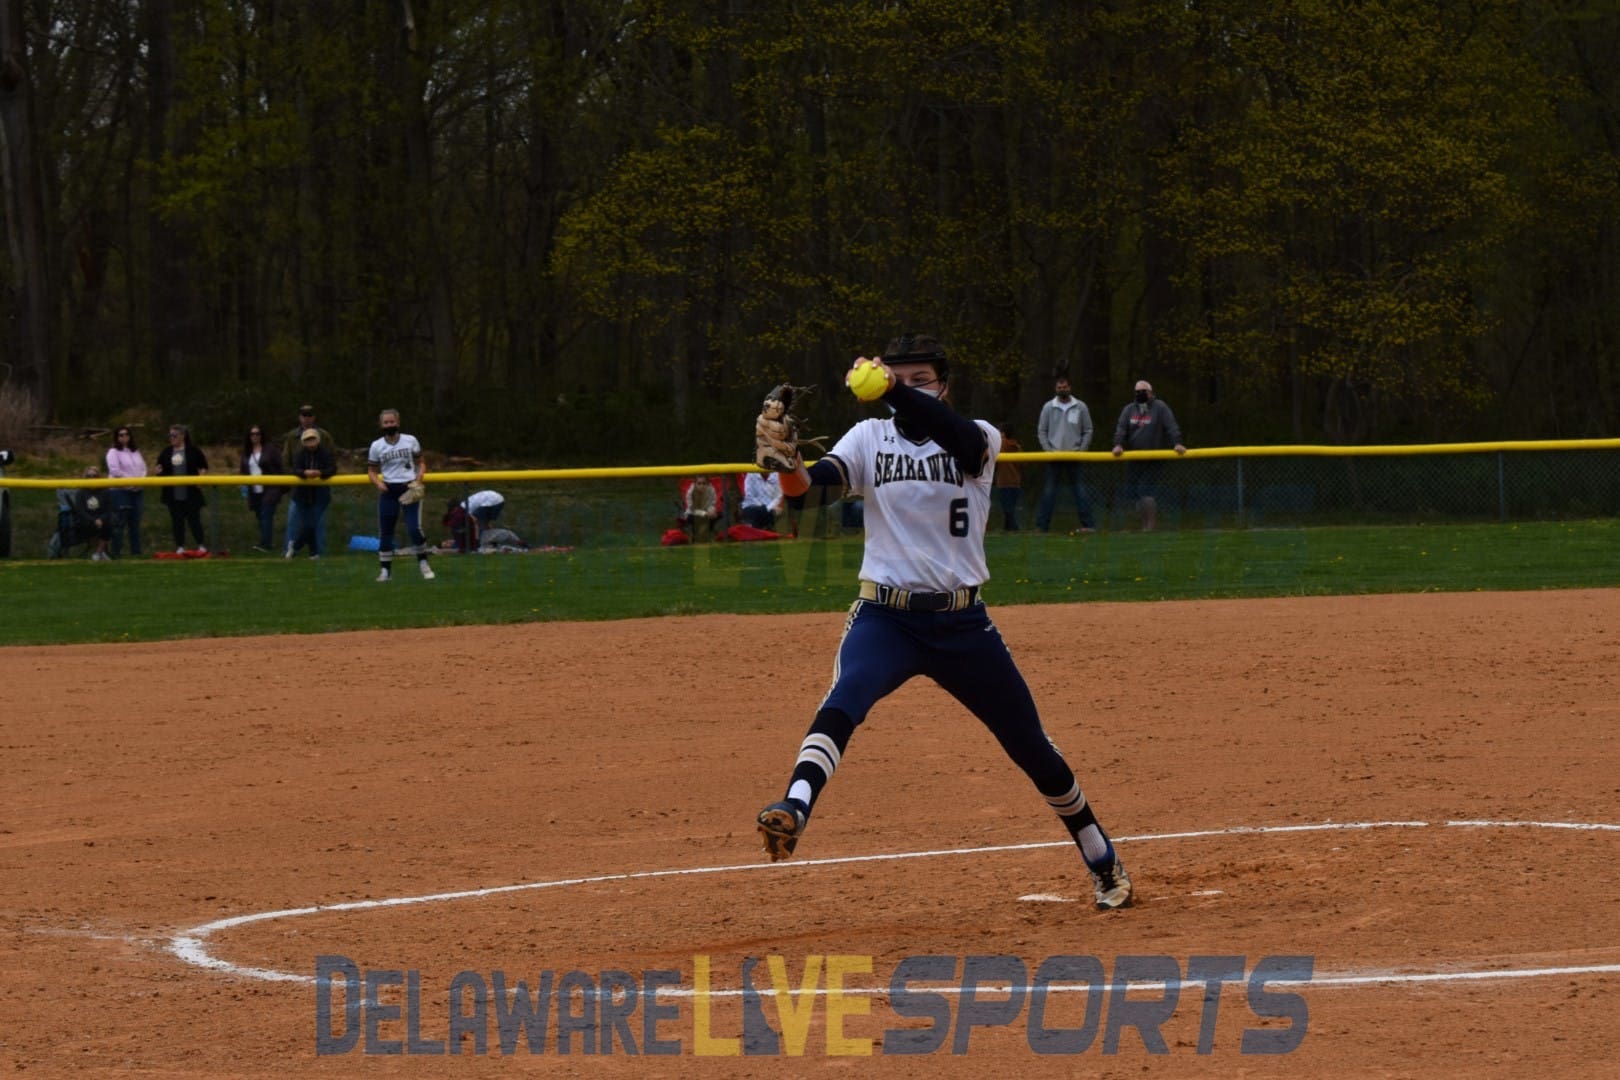 Featured image for “Delaware Military Academy vs Smyrna softball photos”